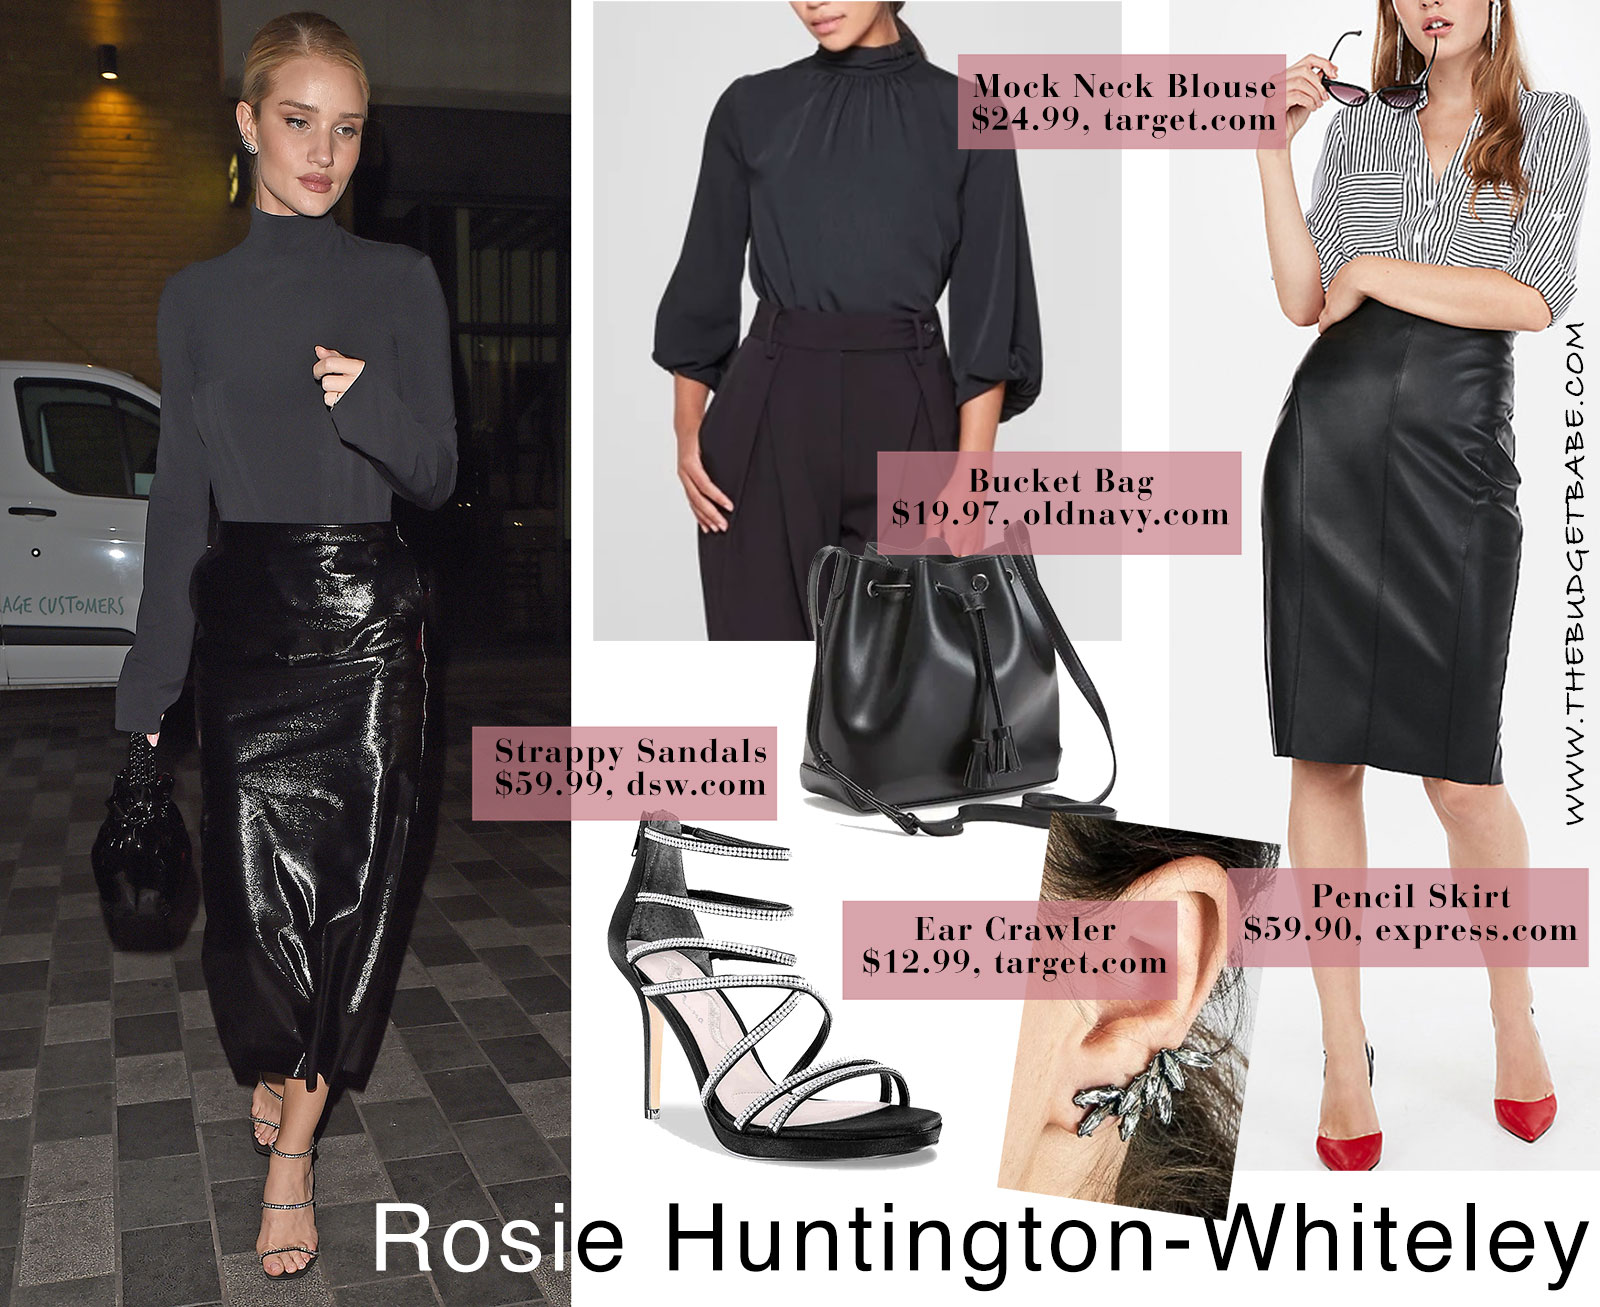 Rosie Huntington-Whiteley's black pencil skirt and bucket bag look for less